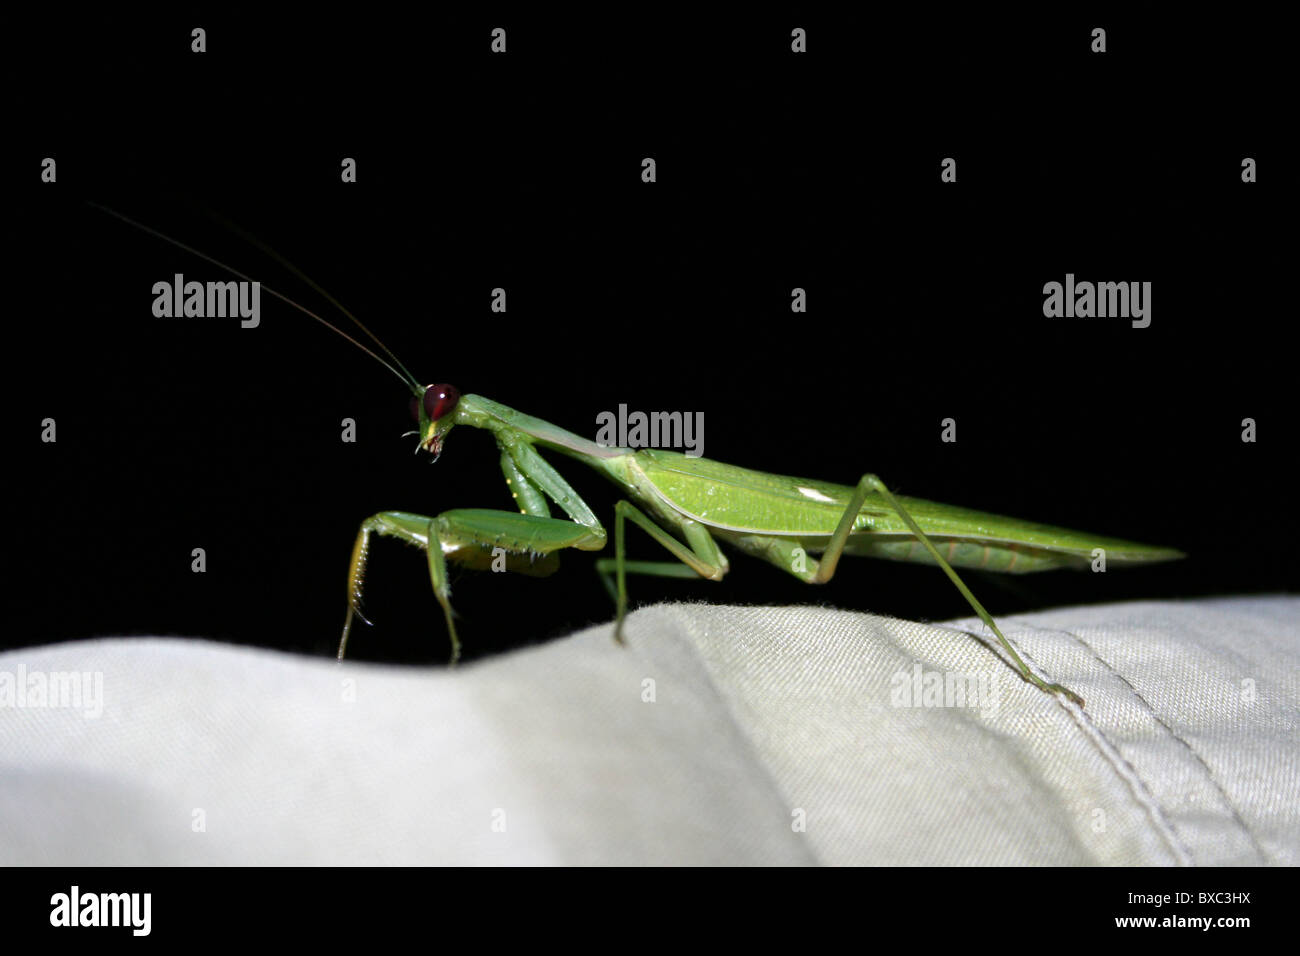 Mantid Sitting On A Persons Shirt Sleeved Arm, Arba Minch, Ethiopia Stock Photo